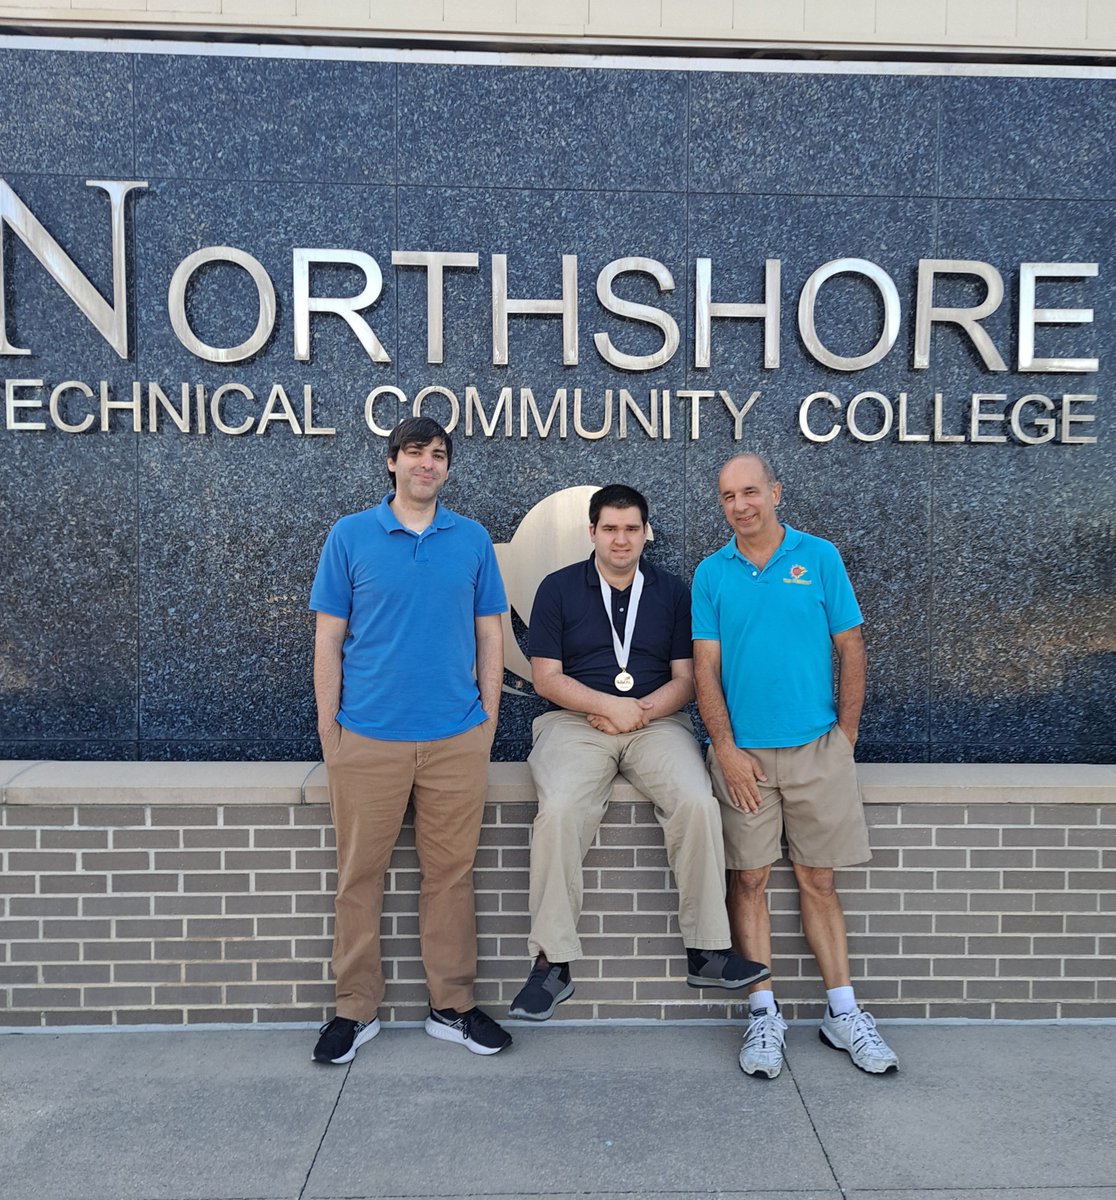 🥇👏 Rory Galiano from Lacombe Campus clinched GOLD in Technical Computer Applications at state SkillsUSA! 🌟 Pictured with his dad, Edward Galiano, and instructor Jonathan Bendernagel. Keep shining, Rory! 💻🎉 #SkillsUSAChamp #ProudMoment 🥇👨‍💻👏